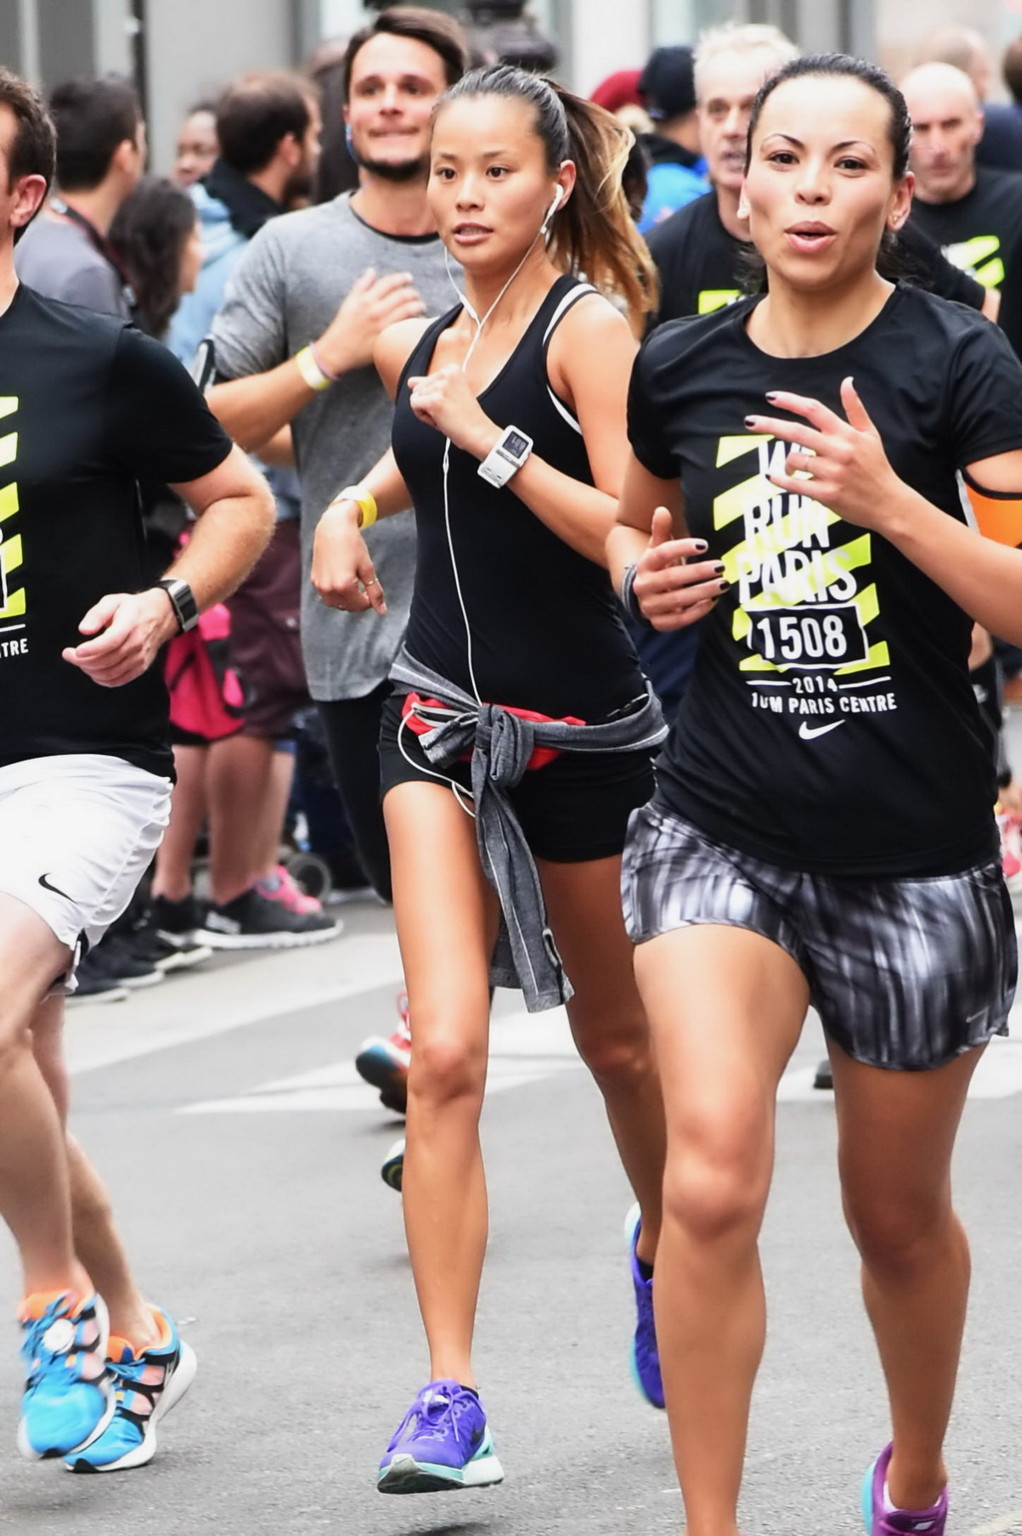 Jamie Chung wearing tiny black top and shorts while running in the Nike 10km Par #75184165